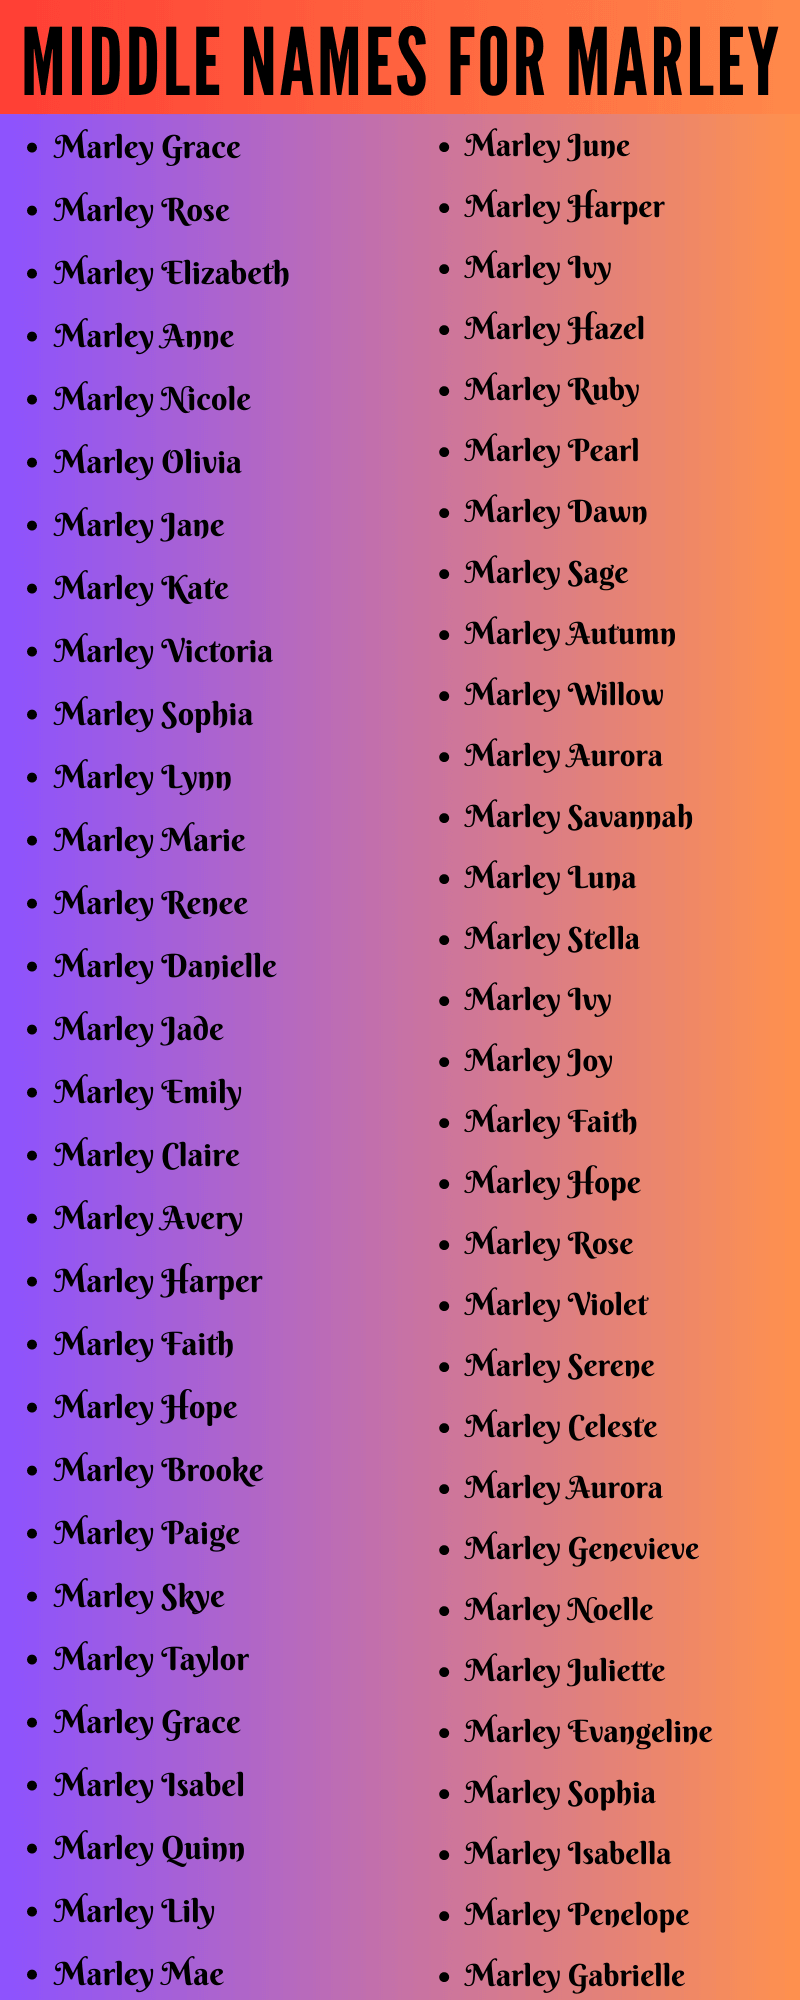 400 Classy Middle Names For Marley